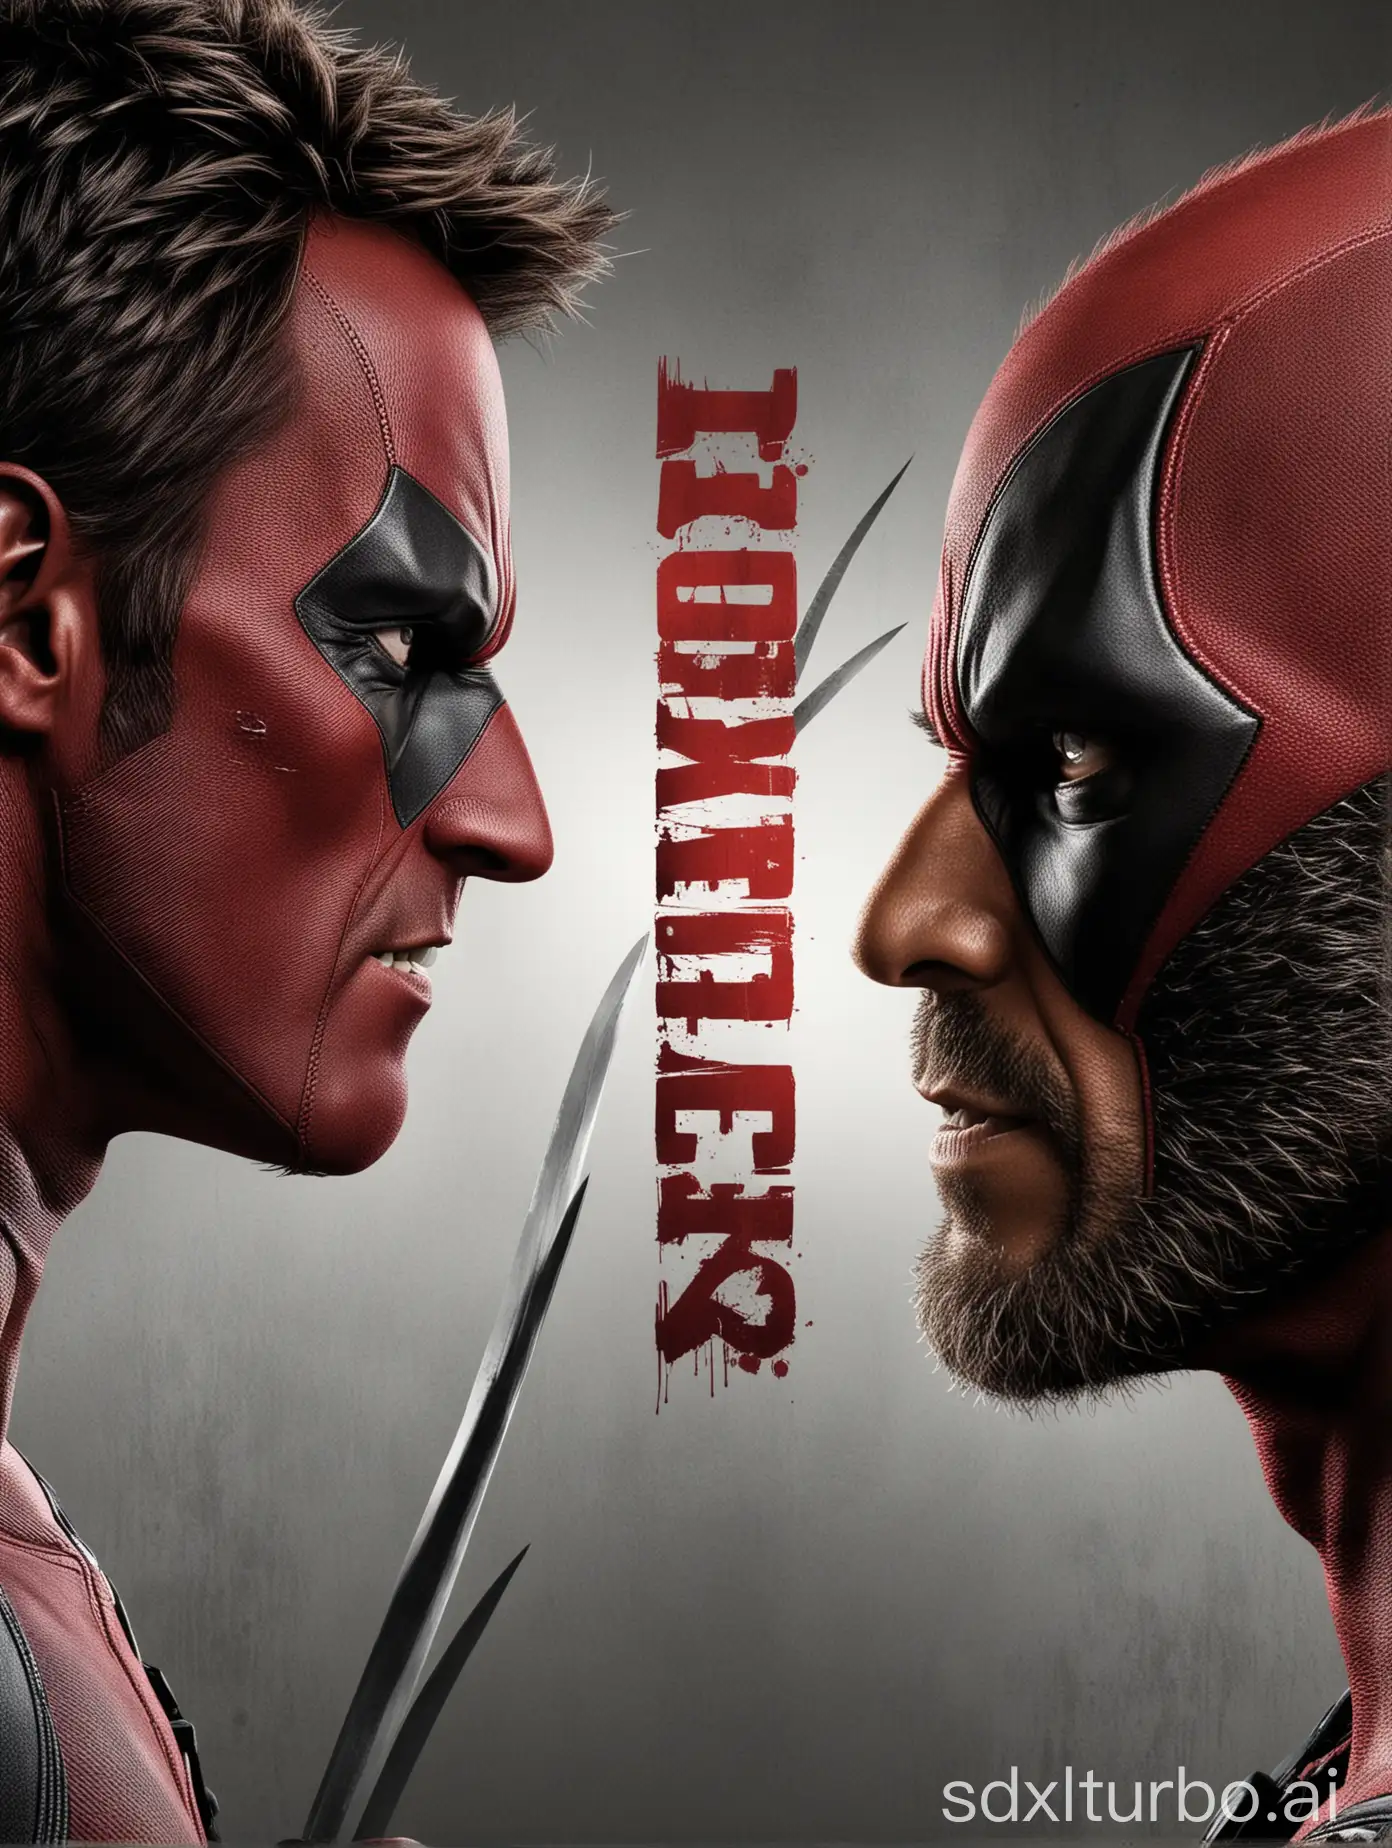 Hugh-Jackman-and-Ryan-Reynolds-Face-Off-in-Deadpool-Wolverine-Poster